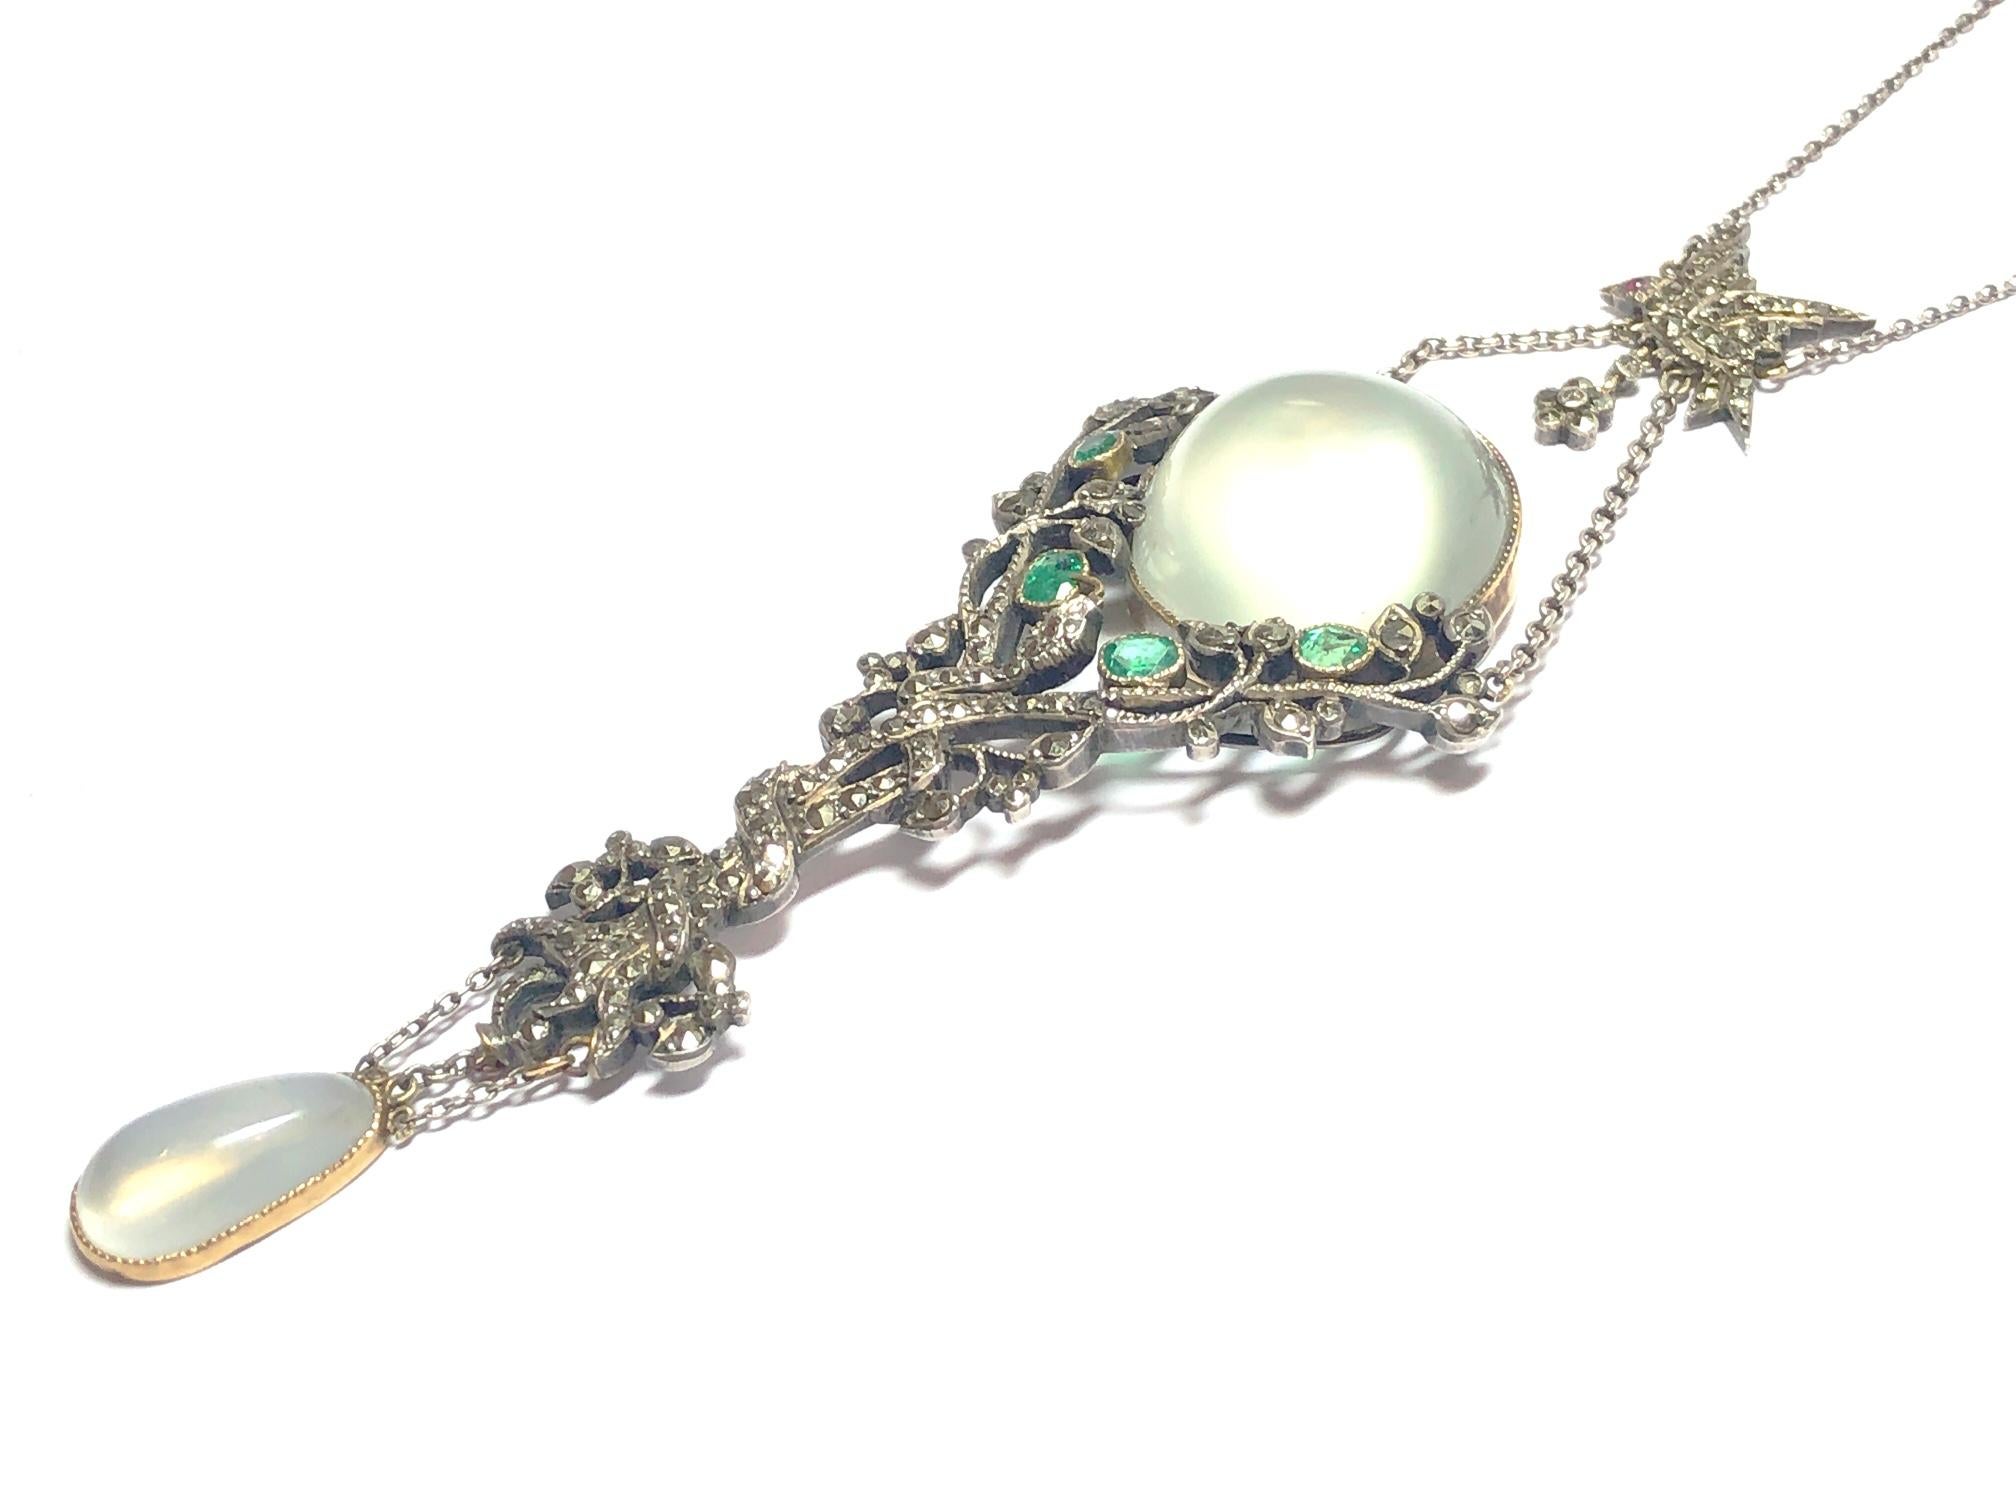 An Art Nouveau moonstone, emerald and marcasite silver mounted pendant. The circular moonstone supported set in a gold mount, set above an emerald leaved tree with serpents entwined around the trunk the base suspending a pear shaped moonstone, all